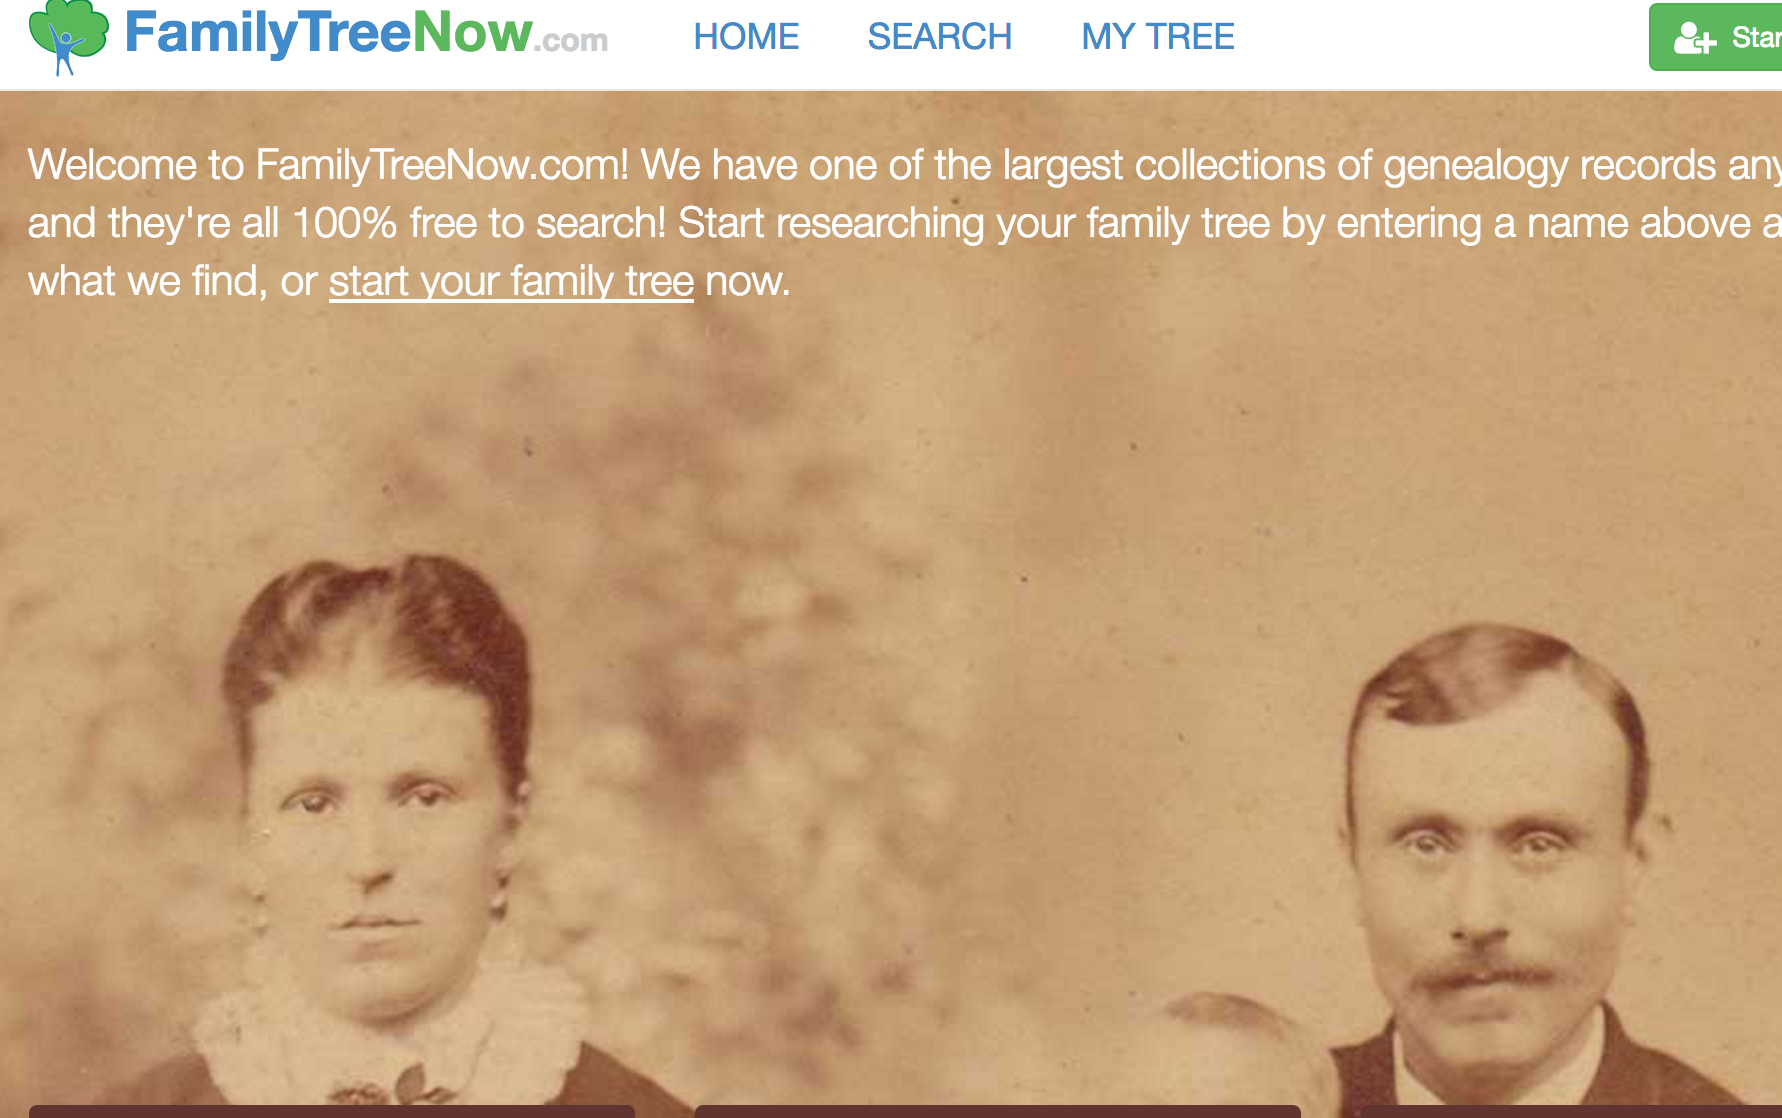 It’s Creepy, But Not Illegal, For This Website To Provide All Your Public Info To Anyone